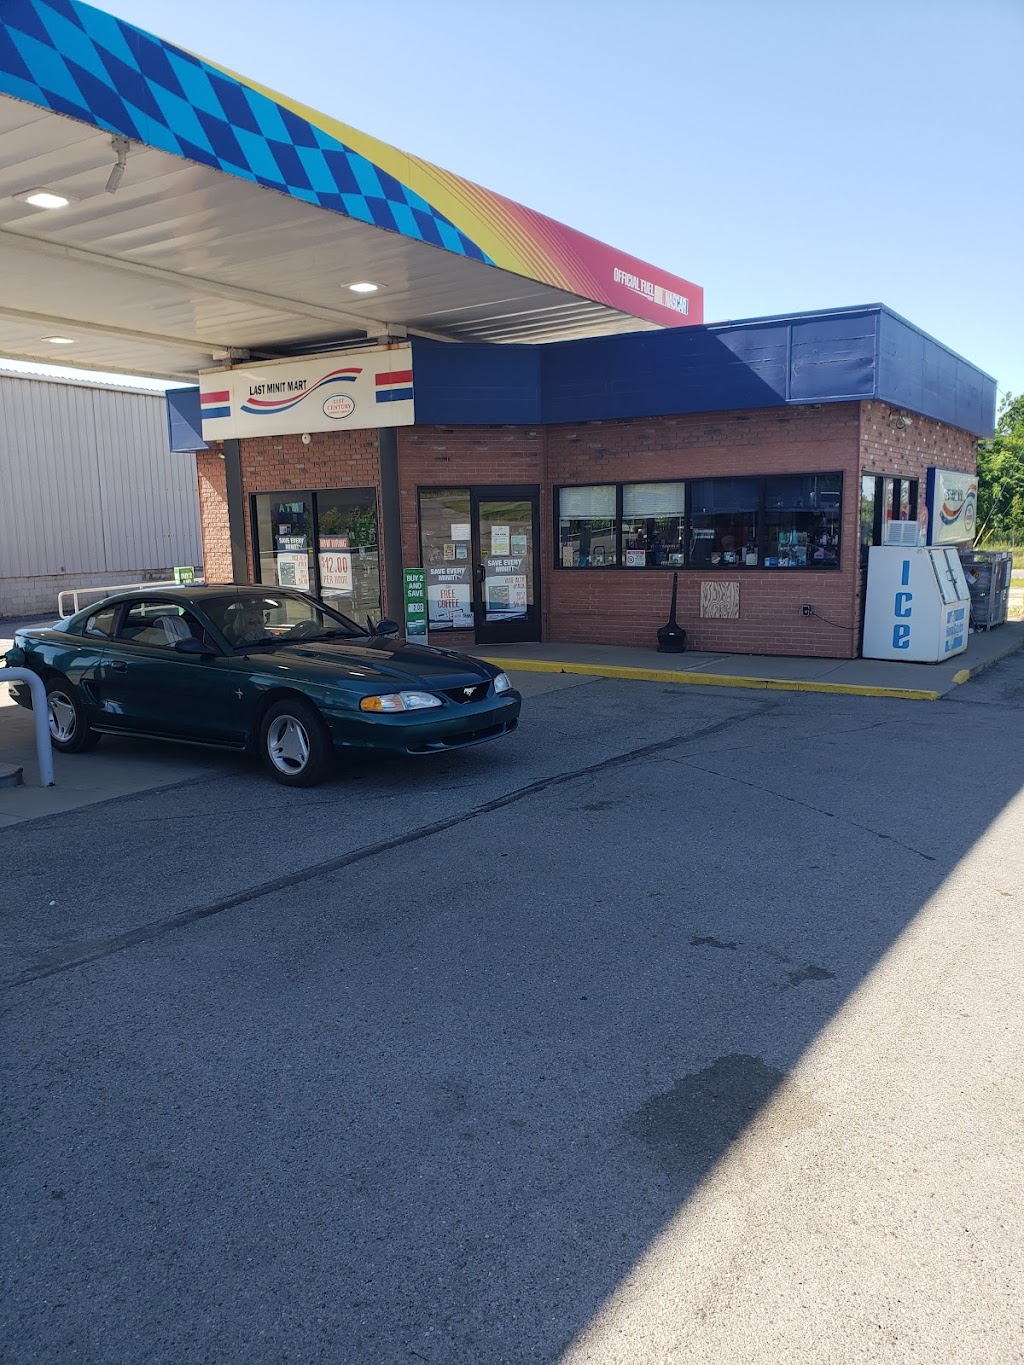 Sunoco Gas Station | 2895 New Butler Rd, New Castle, PA 16101, USA | Phone: (724) 321-9266